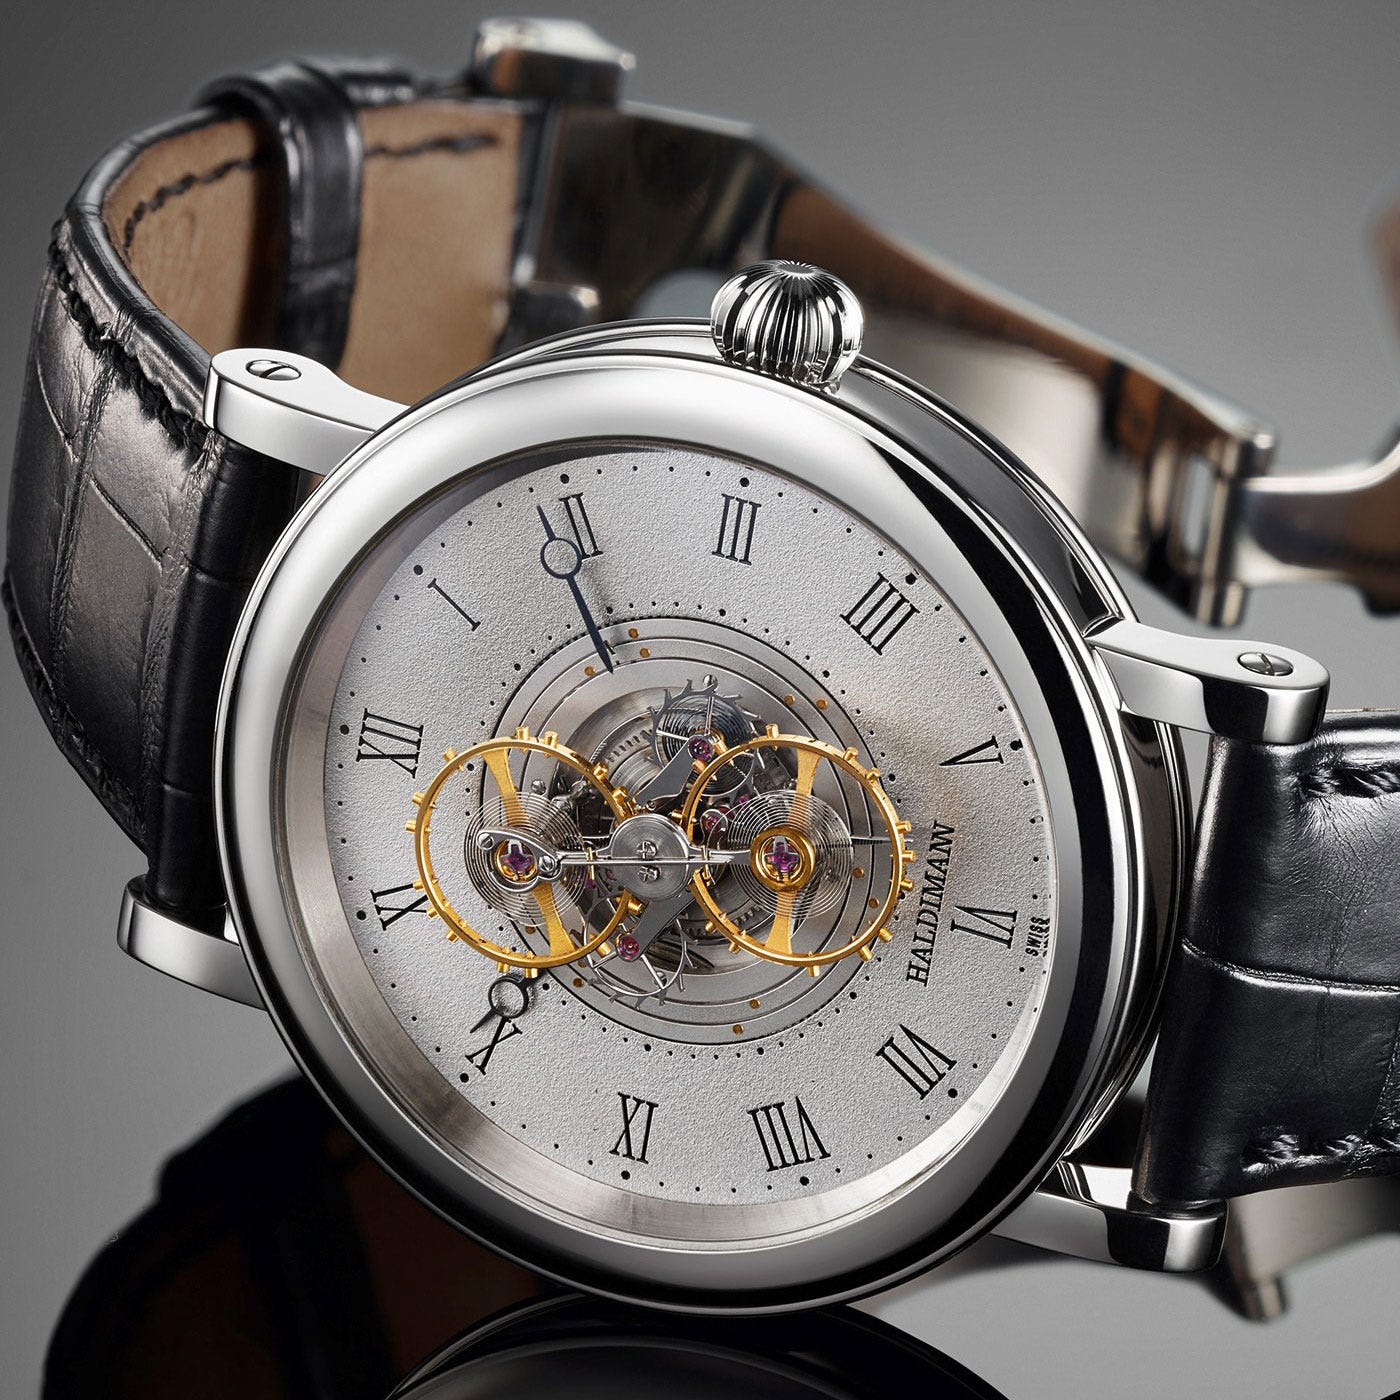 Introducing Armin Strom's Mirrored Force Resonance Manufacture Edition